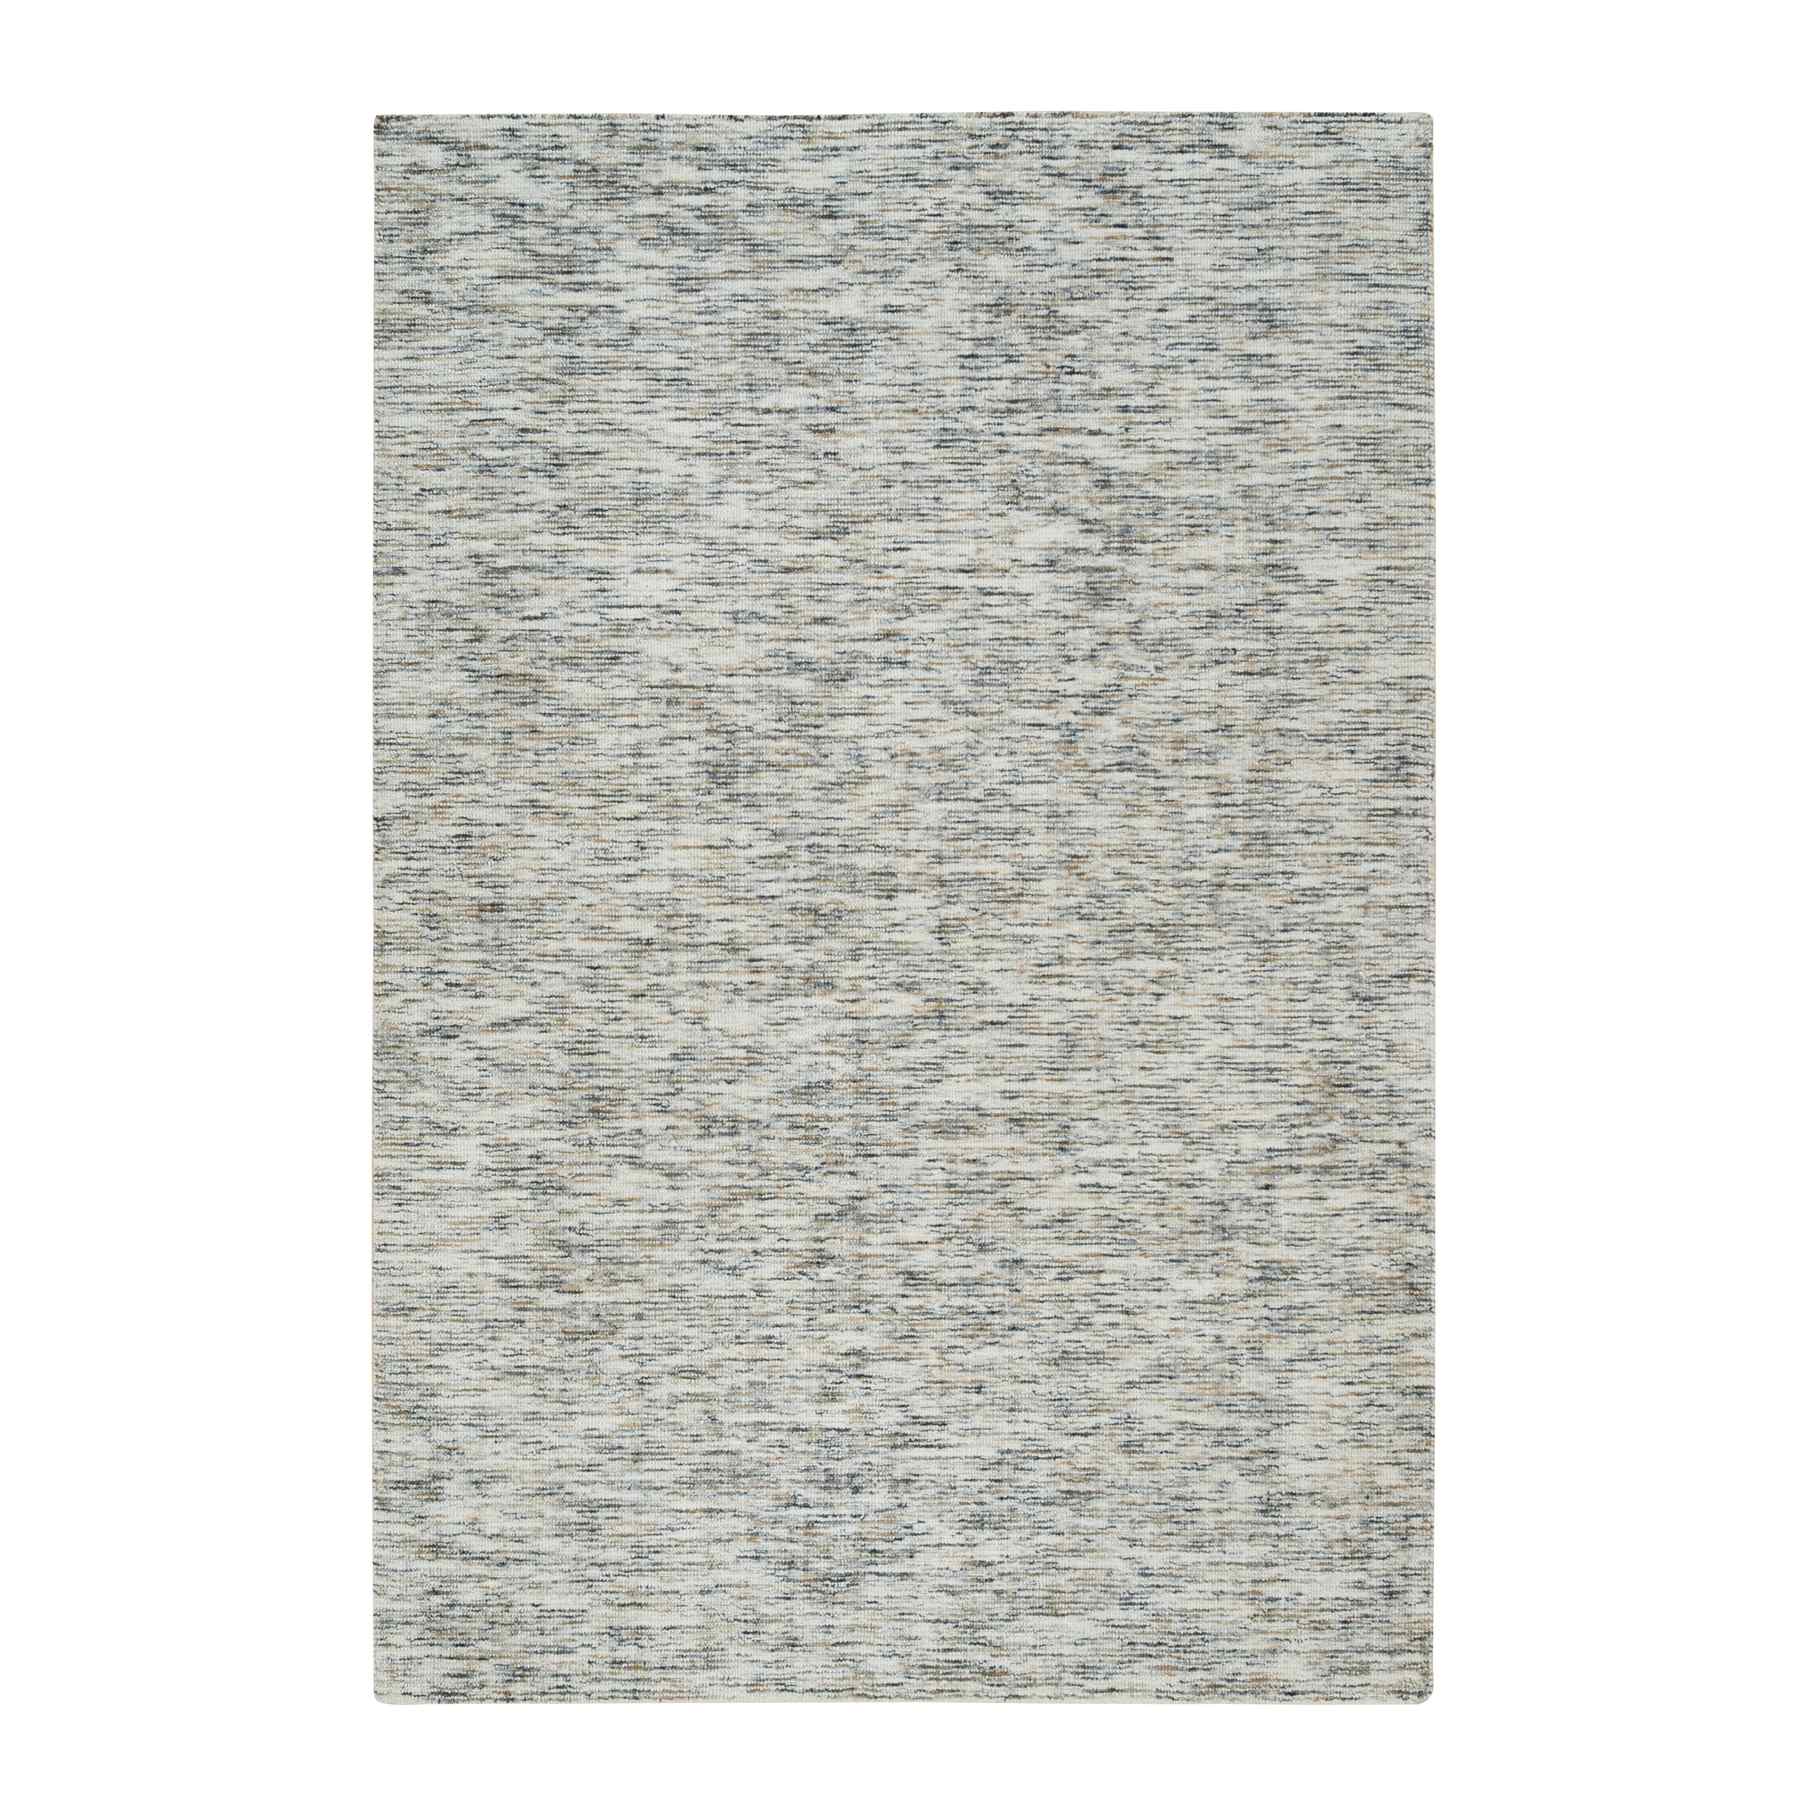 Earth Tone Colors, Hand Loomed Modern Striae Design Soft to the Touch Pure Wool Oriental 